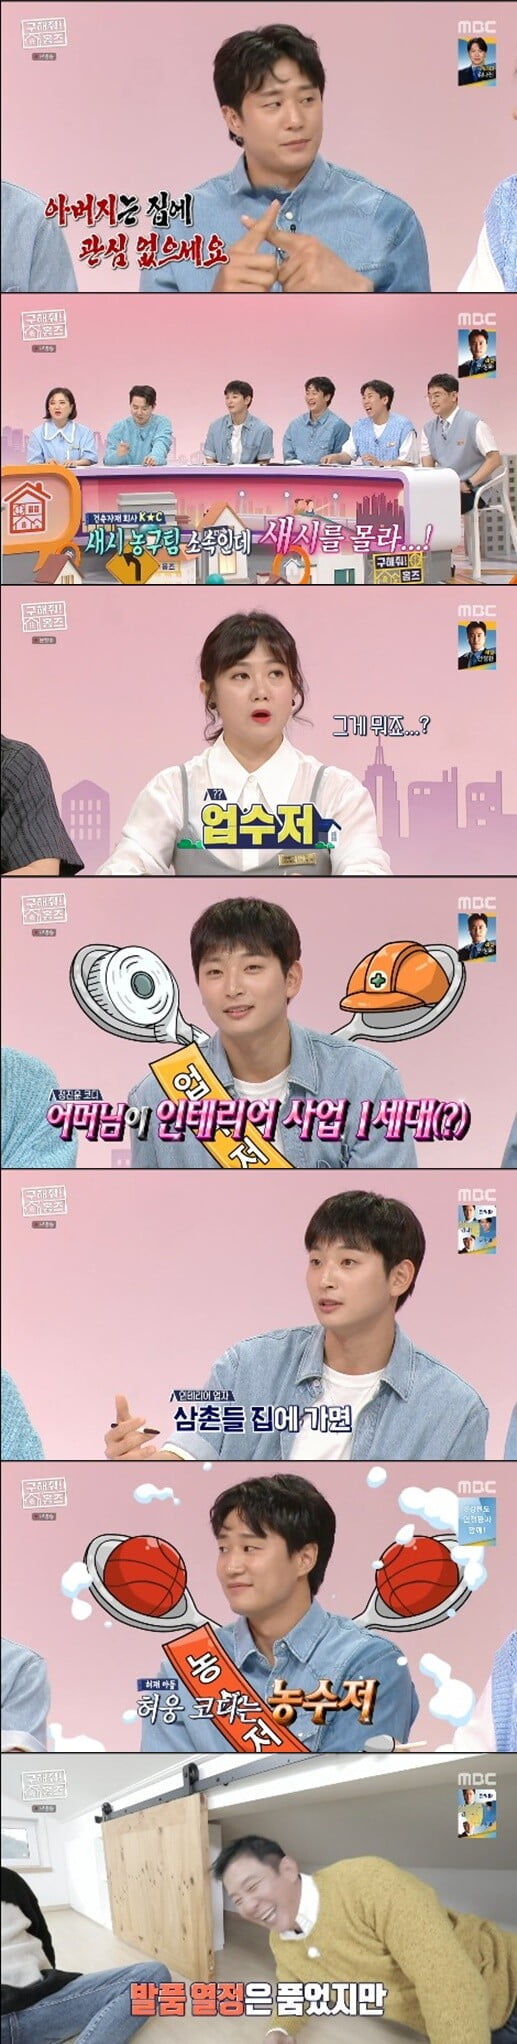 Save Homes basketball player Heo Ung shows confidence in finding a saleActor Ha Do-kwon, Interiors specialist jo hee-sun and Jang Dong-min, actor Jeong Jinwoon, basketball player Heo Ung and Yang Se-chan appeared as guests in MBC entertainment program Save Homes broadcasted on the afternoon of the 4th.When MC Jeong Jinwoon appeared on the day, Boom said, This is Sujeo, he said, My mother is the first generation of Interiors business. So Kim said, Do you know Interiors well?When I go to my uncles house, I am decorated with all the fashionable things like a model house. I often encountered terminology and fashion interiors.Then, to Heo Ung, MCs said, This is Sujeo, he said. Its the first time my dad and son have come side by side in Save Homes.Heo Ung said, Father is not interested in the house, but I set up my first house in A Year Ago in Winter, but I am different from learning.Jang Dong-min laughed at Heo Ungs Father Hur Jae, saying, I belong to the Sash window basketball team and I do not even know the Sash window term.